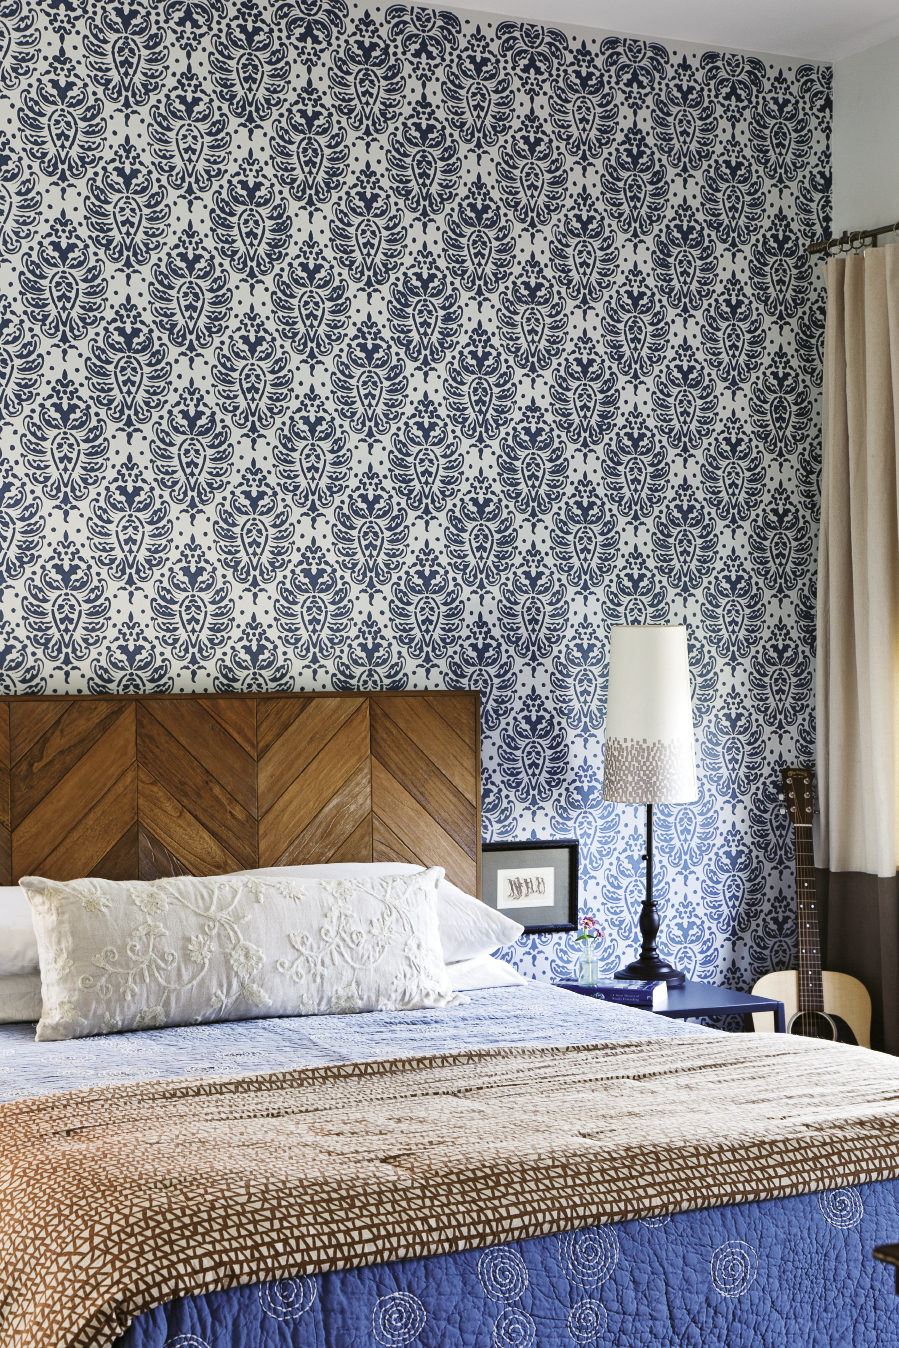 A repeating stencil pattern livens up the master bedroom; the penguin etching next to the bed was a gift from Mathis’ sister.